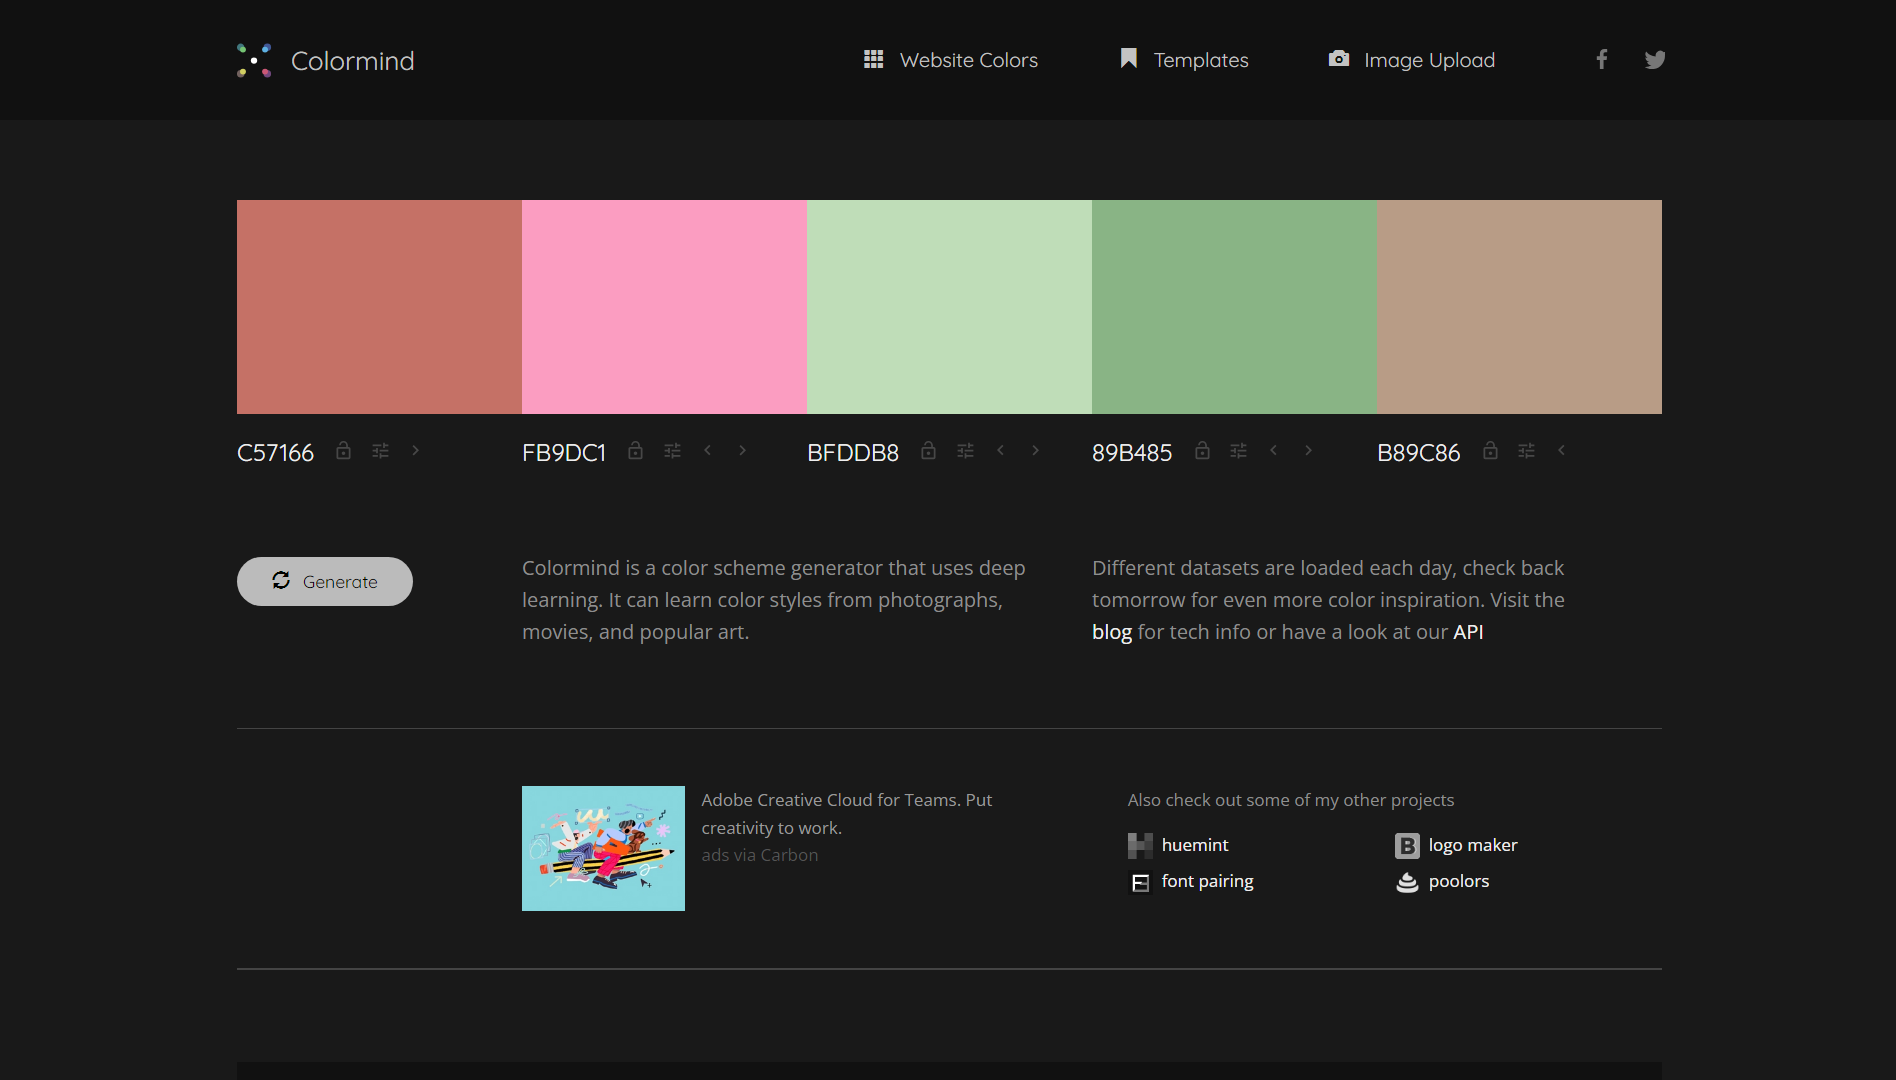 Colormind - Choosing the palette